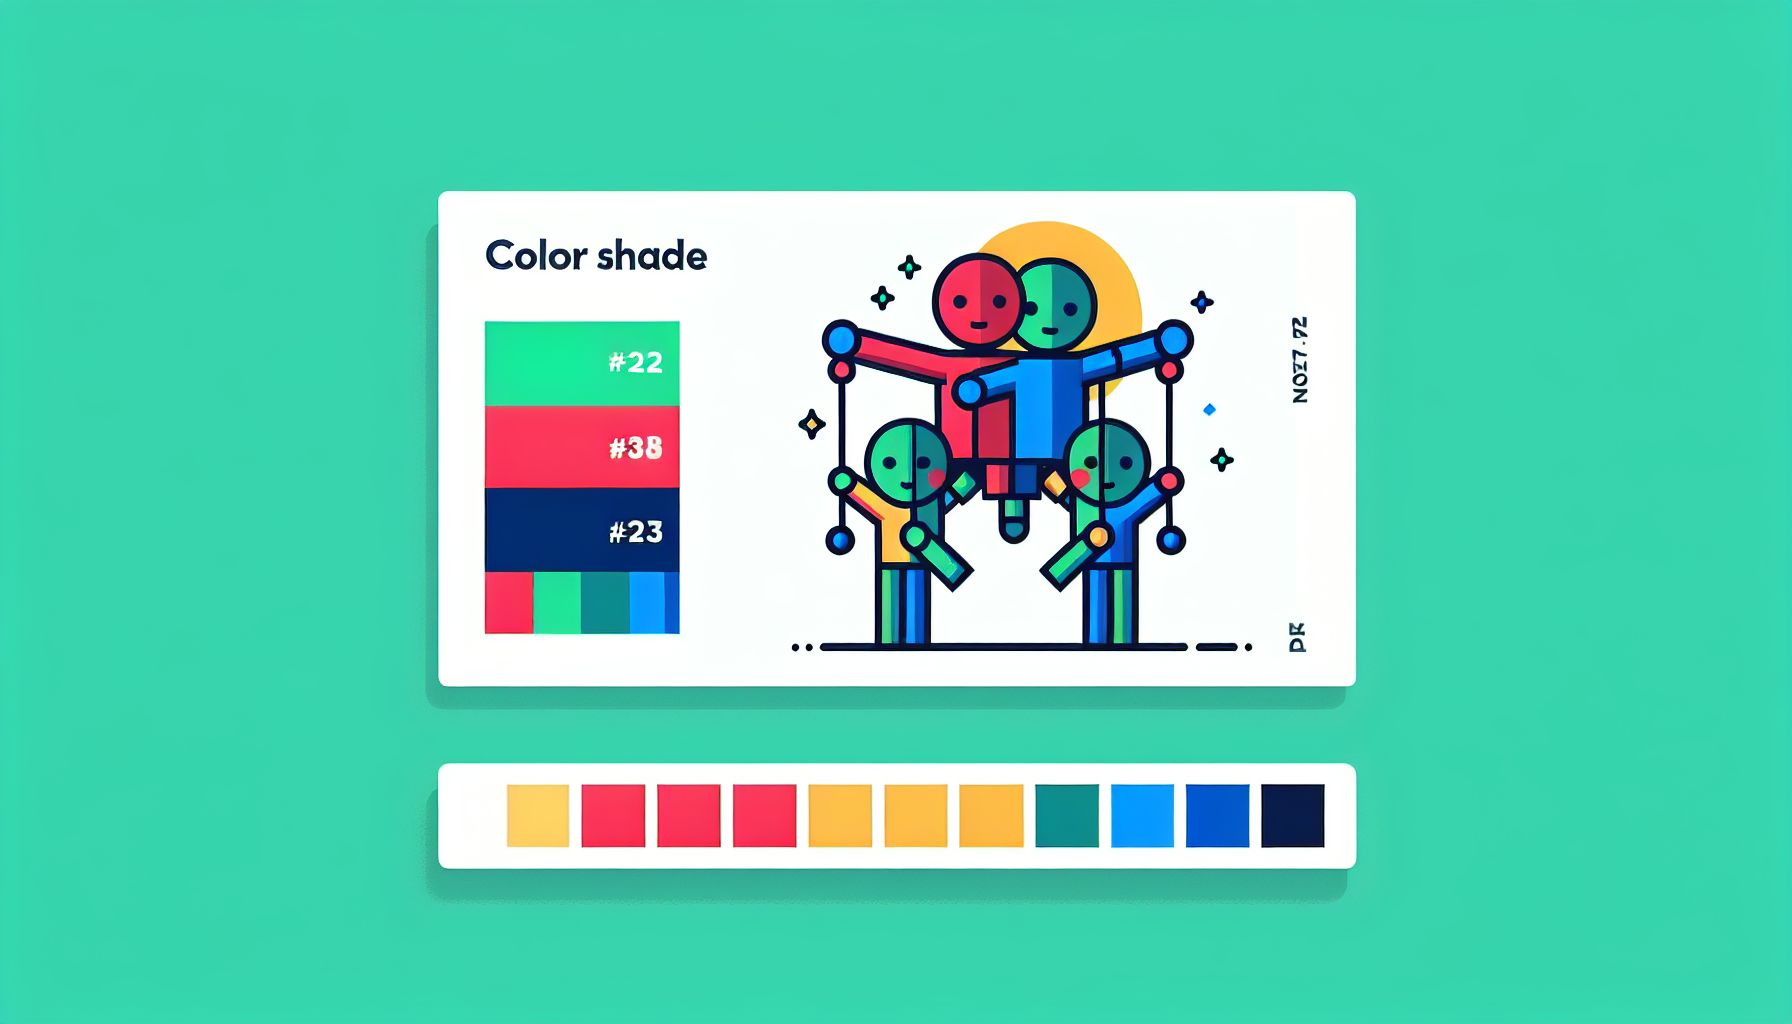 Puppet in flat illustration style and white background, red #f47574, green #88c7a8, yellow #fcc44b, and blue #645bc8 colors.